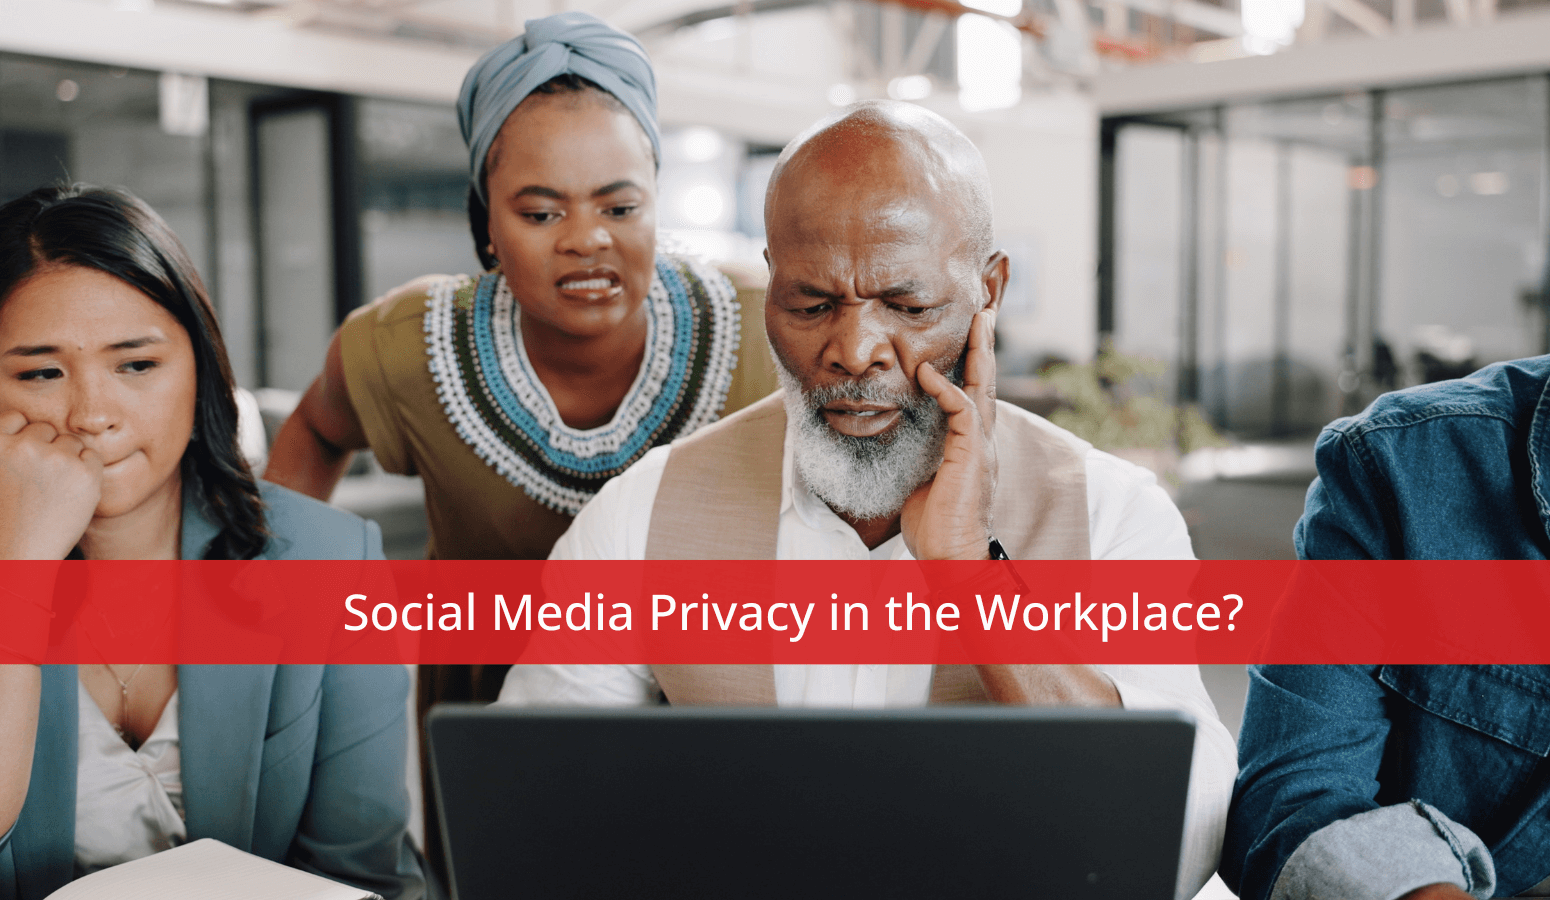 Featured image for “Social Media Privacy in the Workplace?”